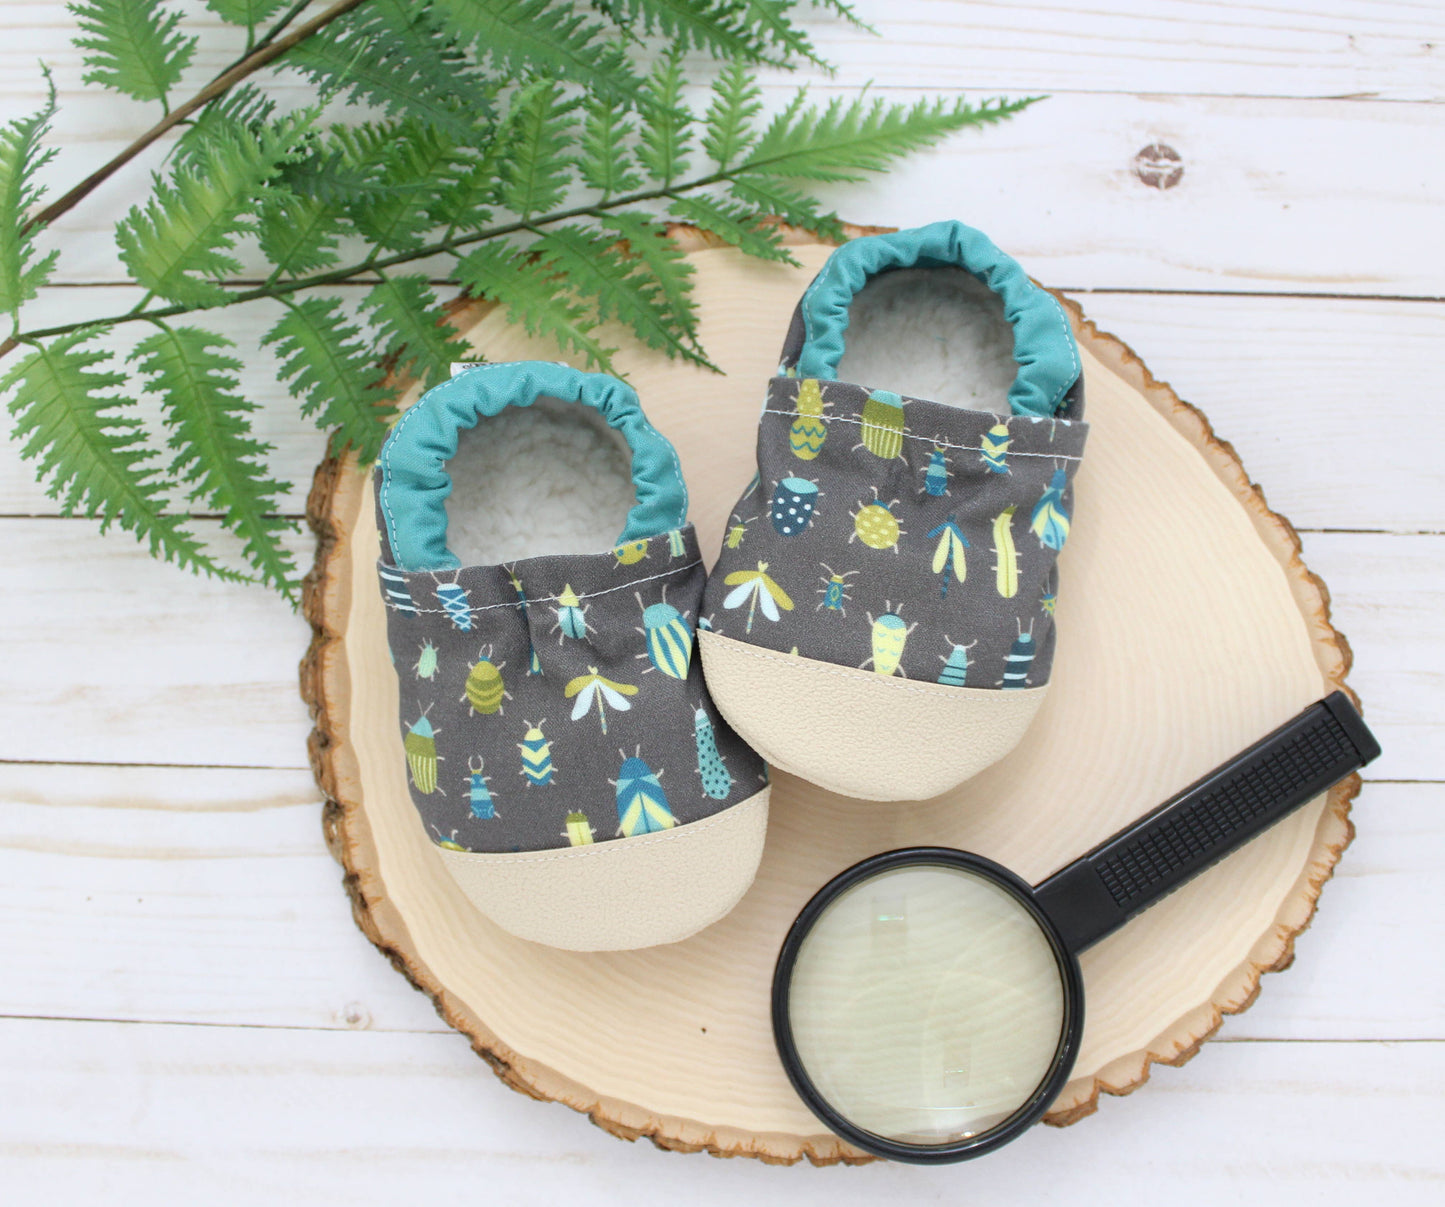 Scooter Booties - Buggy Beetles Baby Shoes